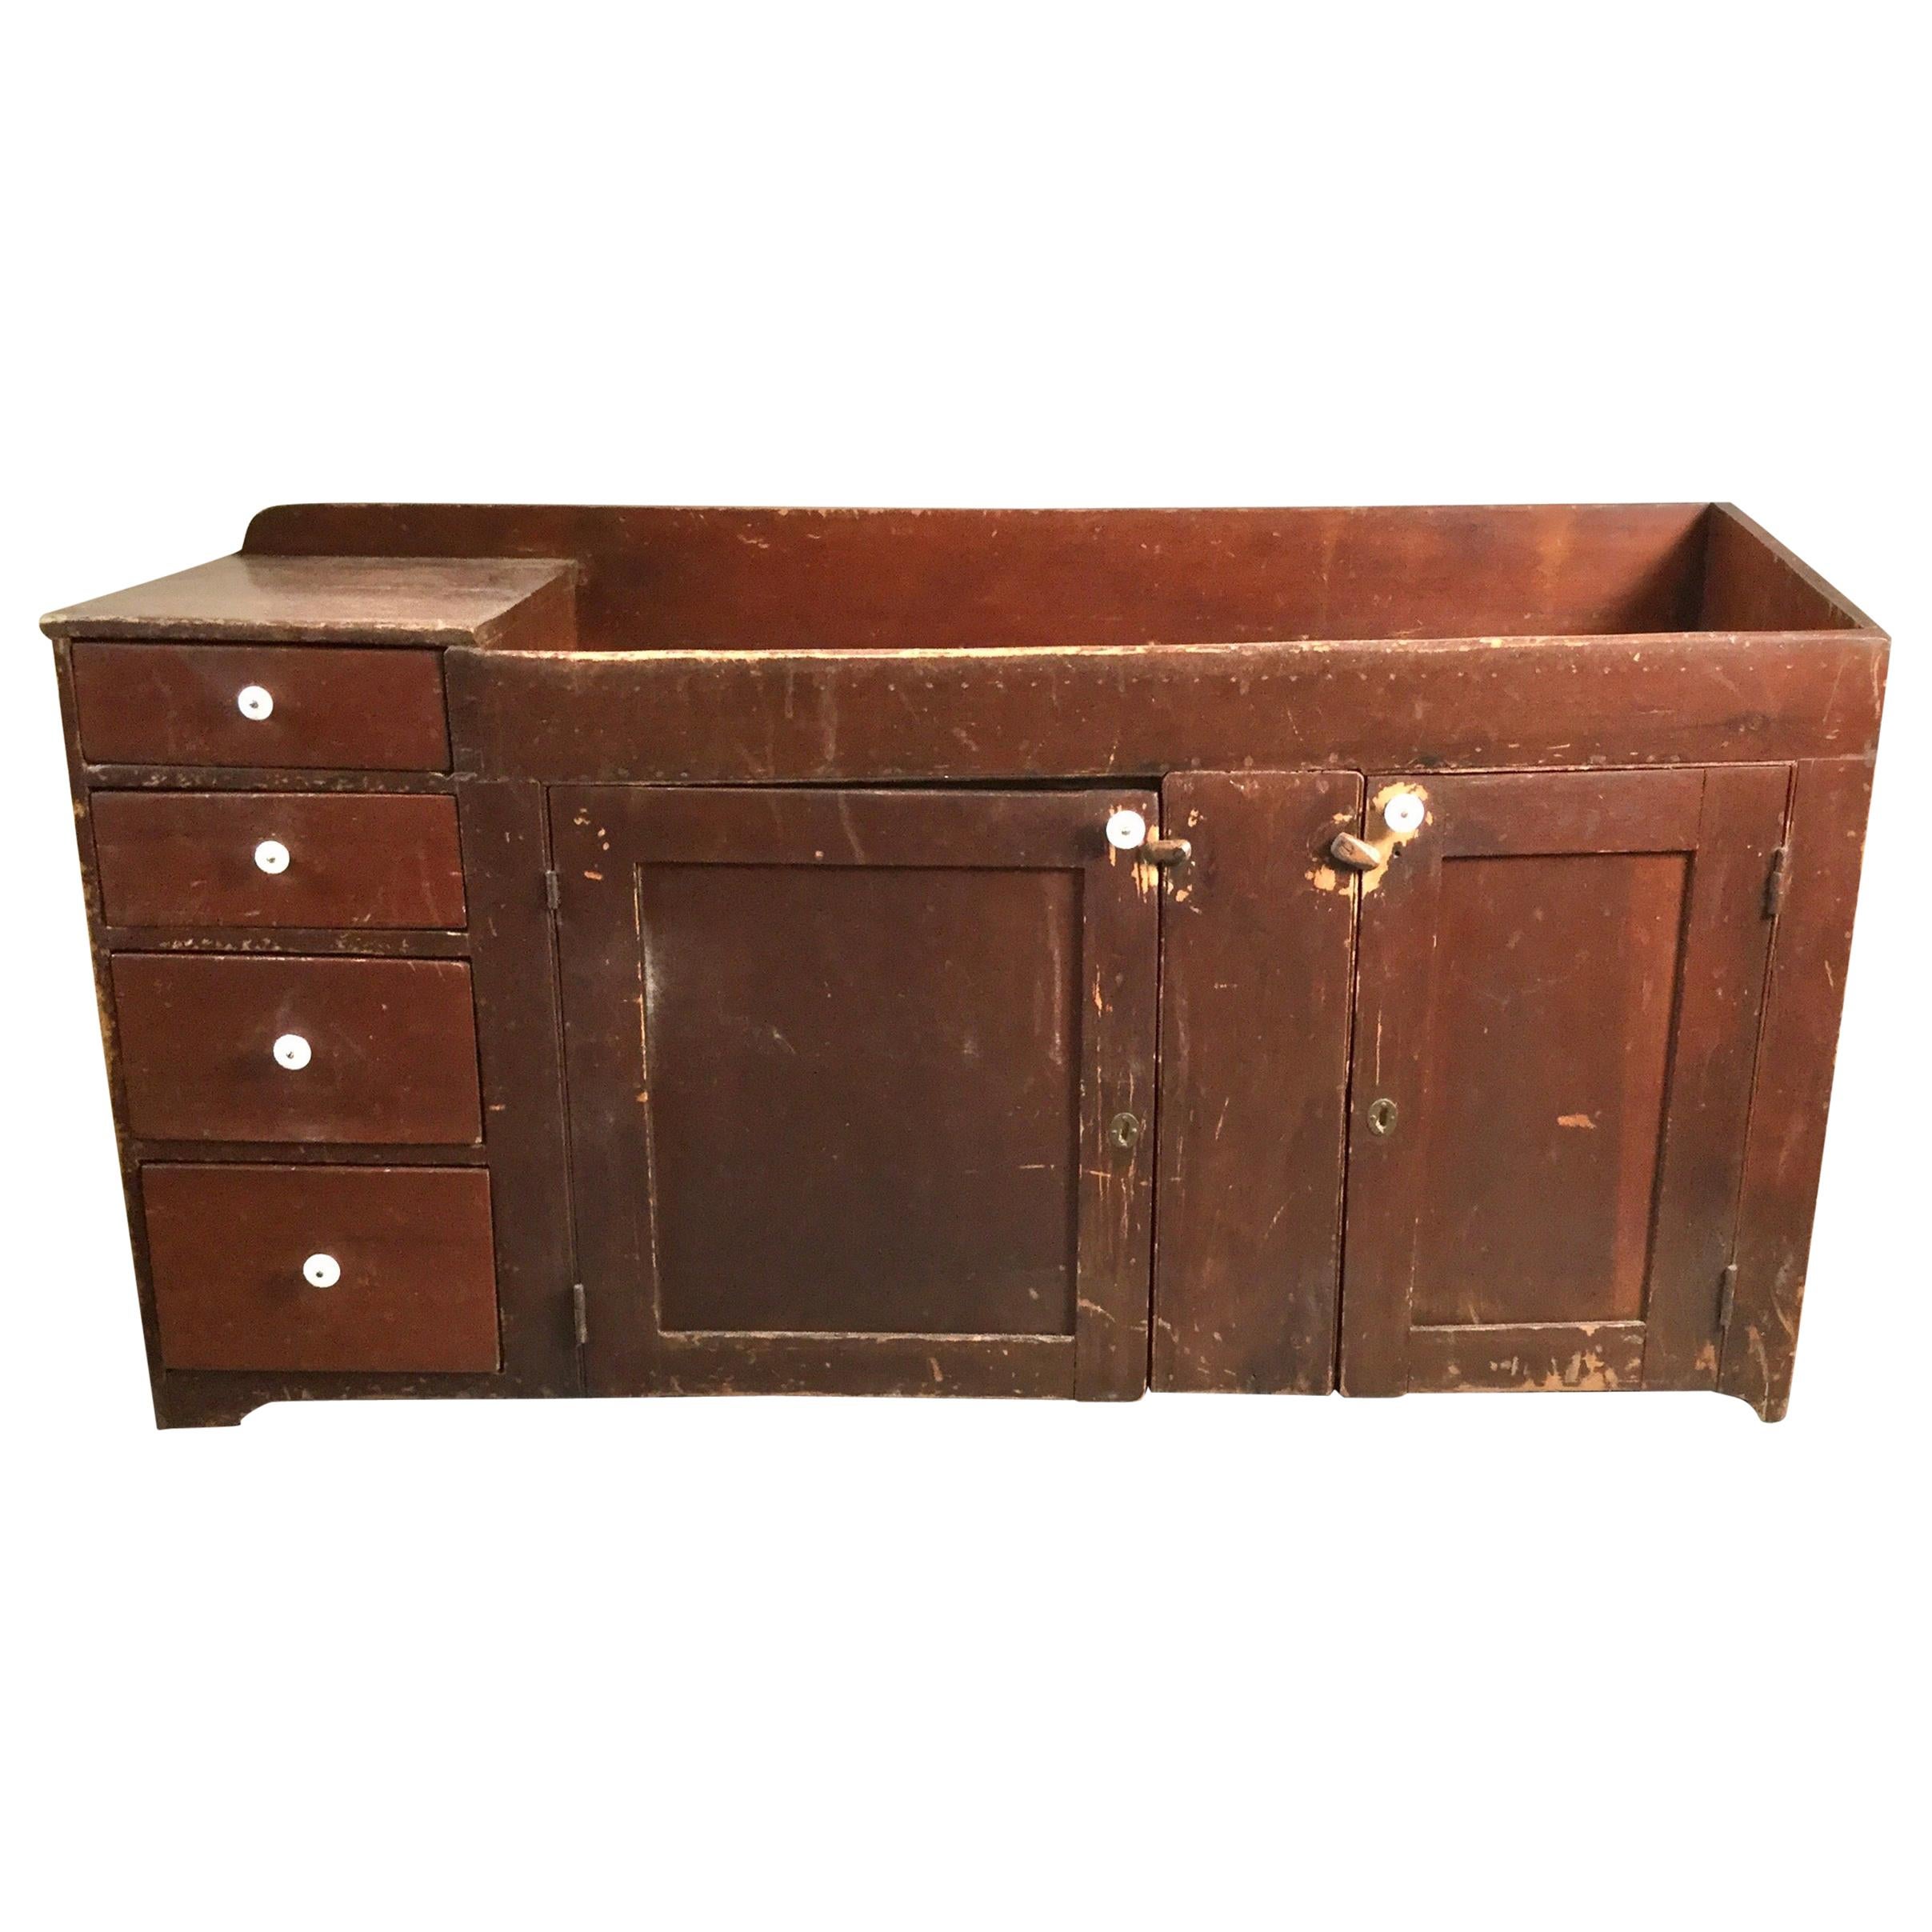 Early Painted Primitive Pine Dry Sink, 1830s